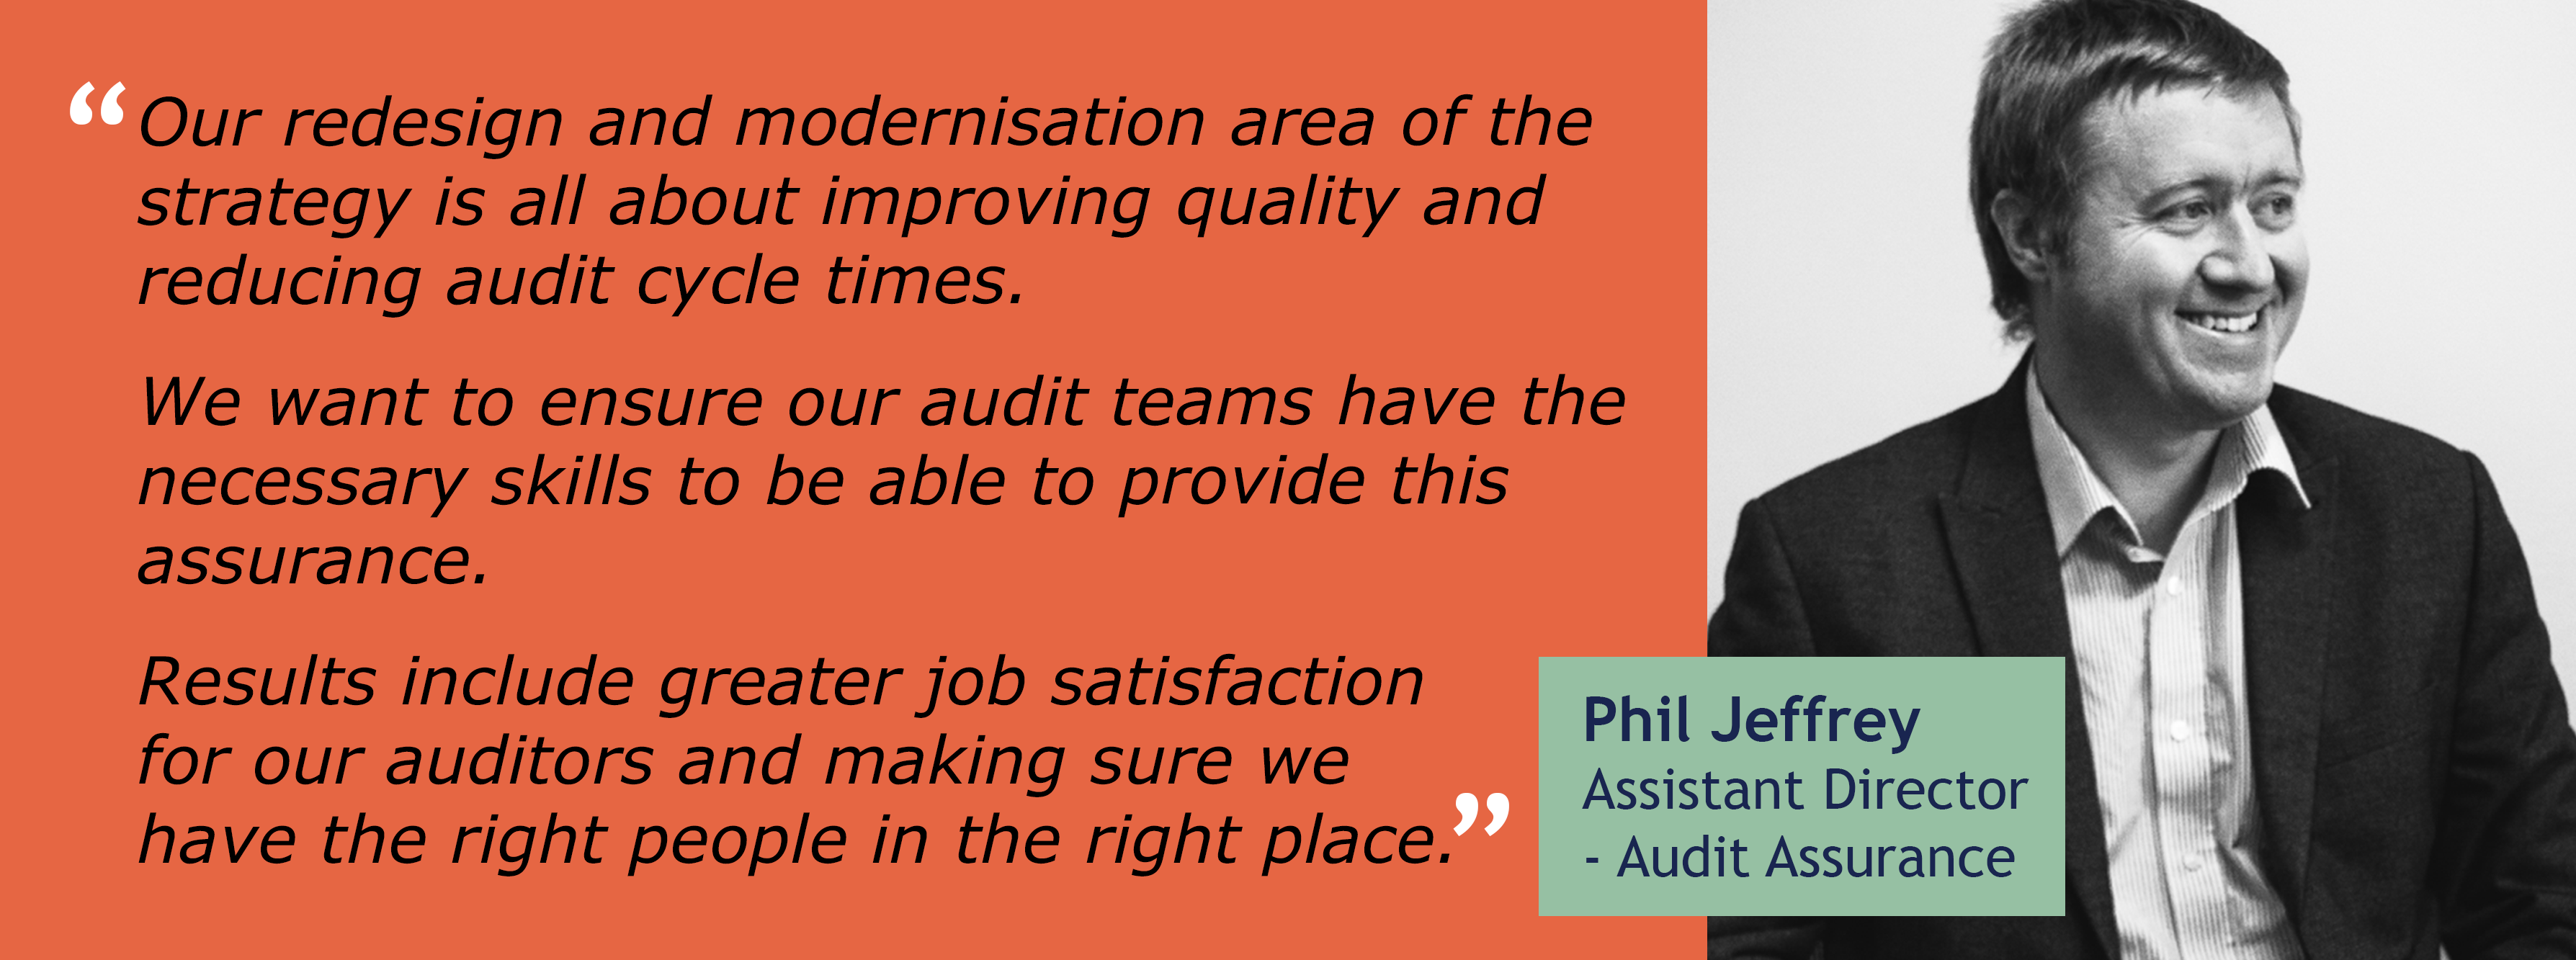 Internal Audit Strategy redesign modernisation - image of Phil Jeffrey with quote: "Our redesign and modernisation area of the strategy is all about improving quality and reducing audit cycle times. We want to ensure our audit teams have the necessary skills to be able to provide this assurance. Results include greater job satisfaction for our auditors and making sure we have the right people in the right place."